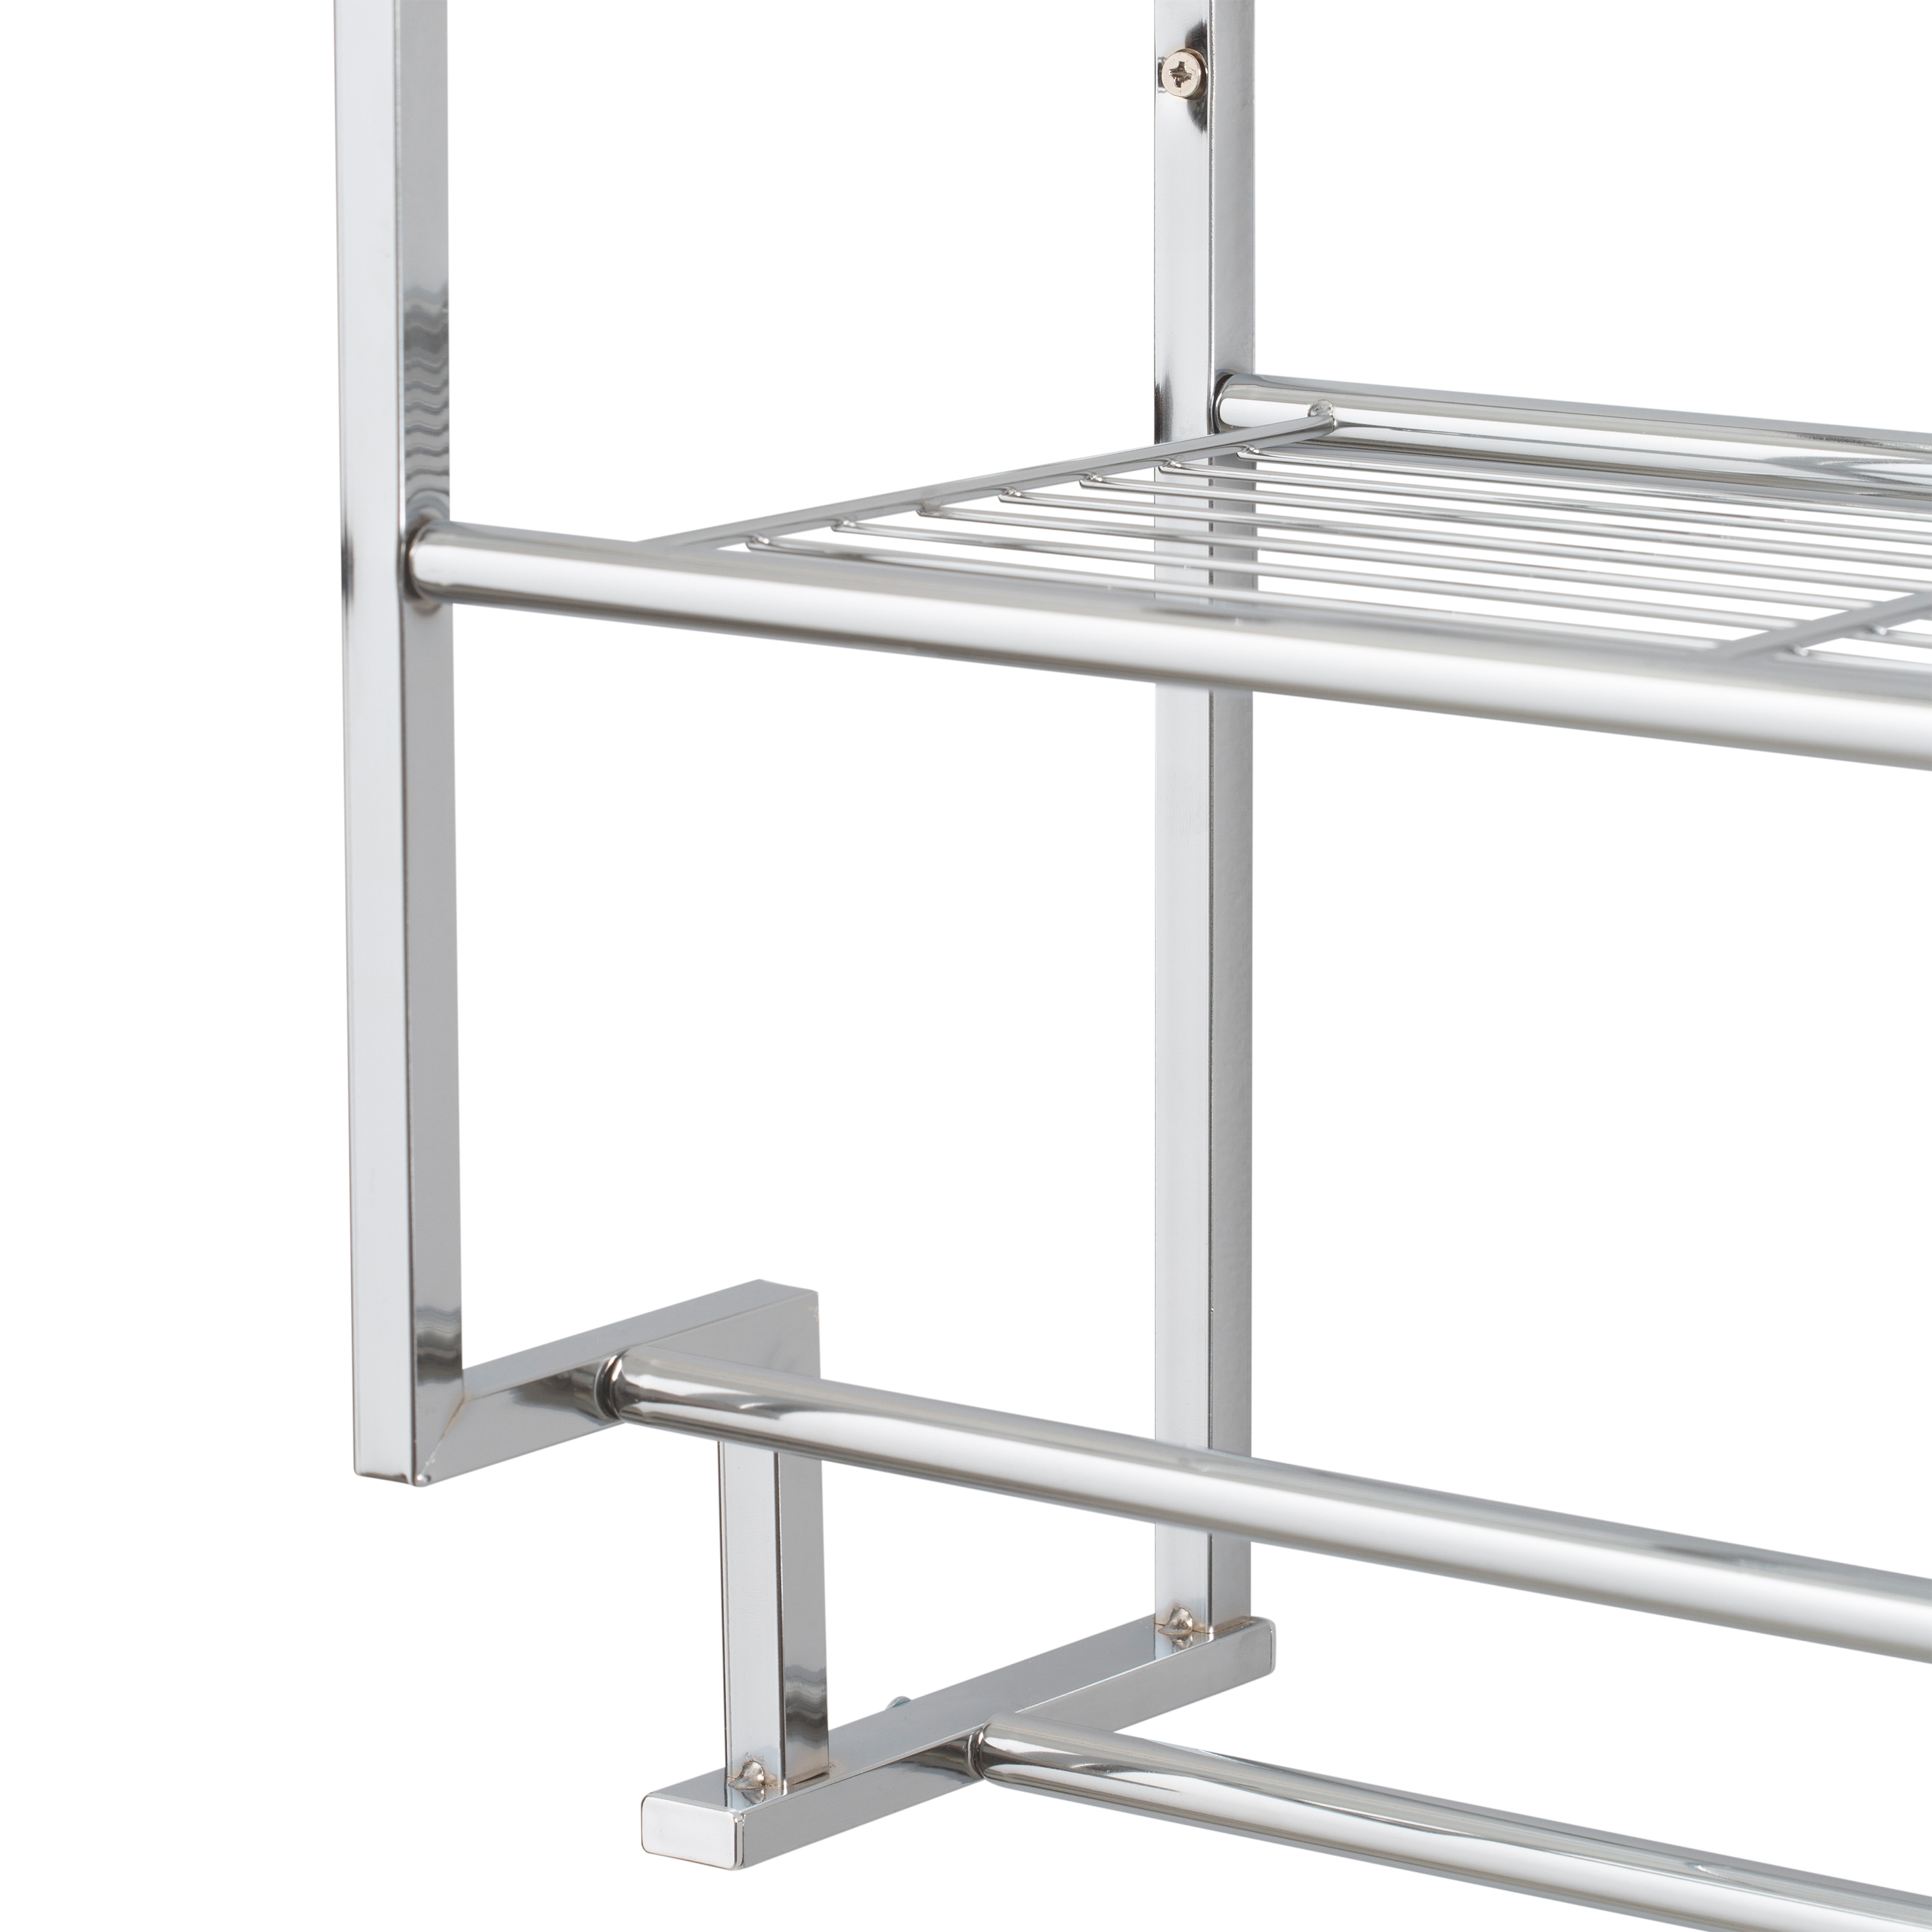 Organize It All 2 Tier Wall Mounted Metal Shelf with Towel Rack - image 5 of 7